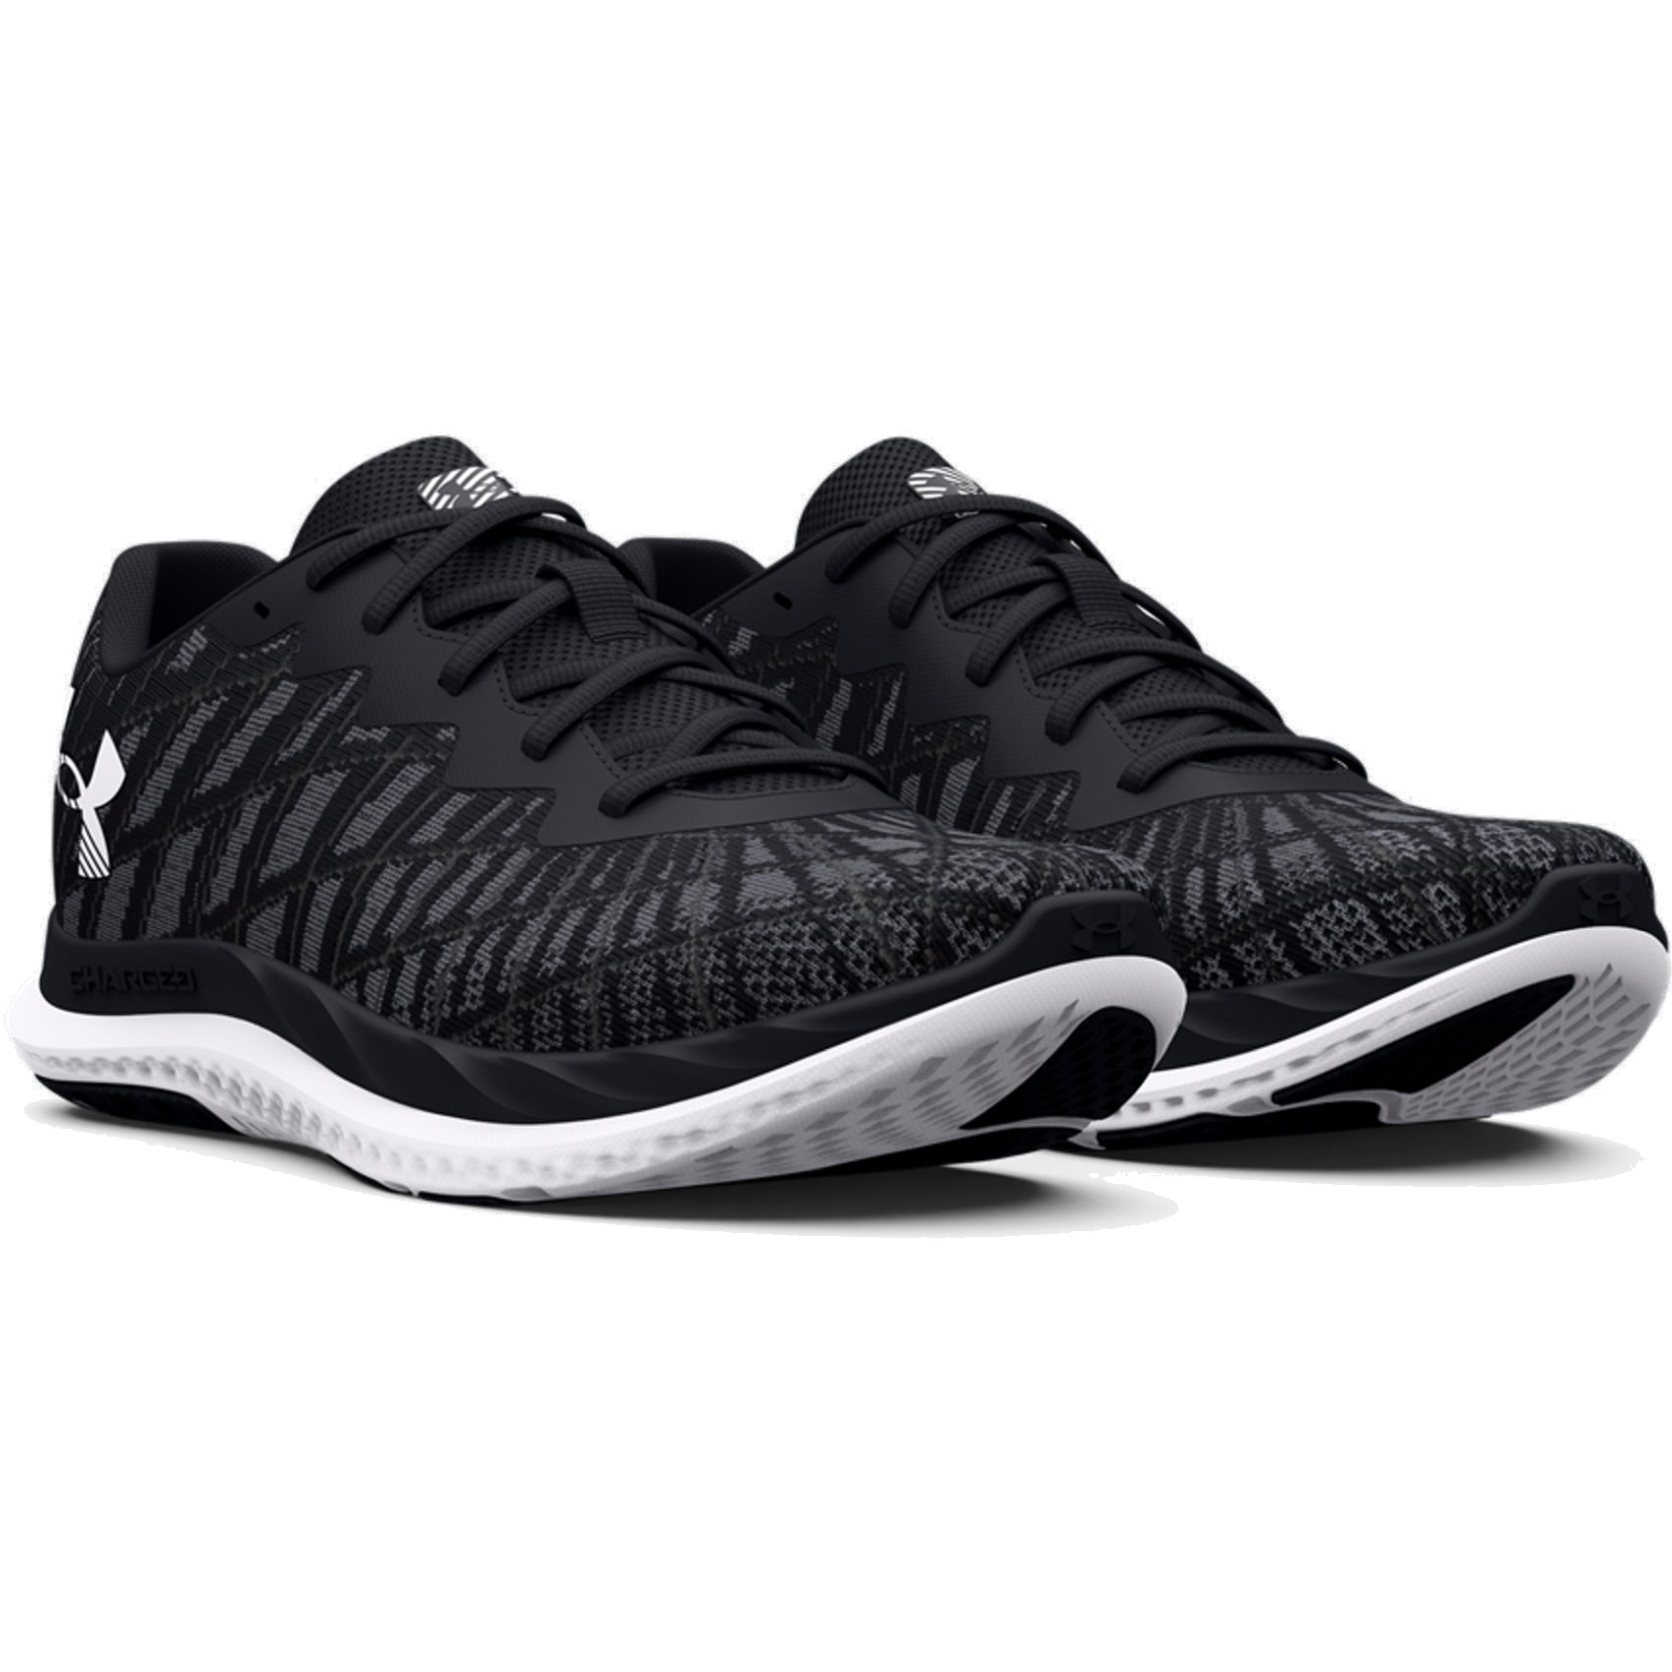 Under Armour Zapatillas de Running Mujer - UA Charged Breeze 2 - Negro/Jet  Gray/Blanco